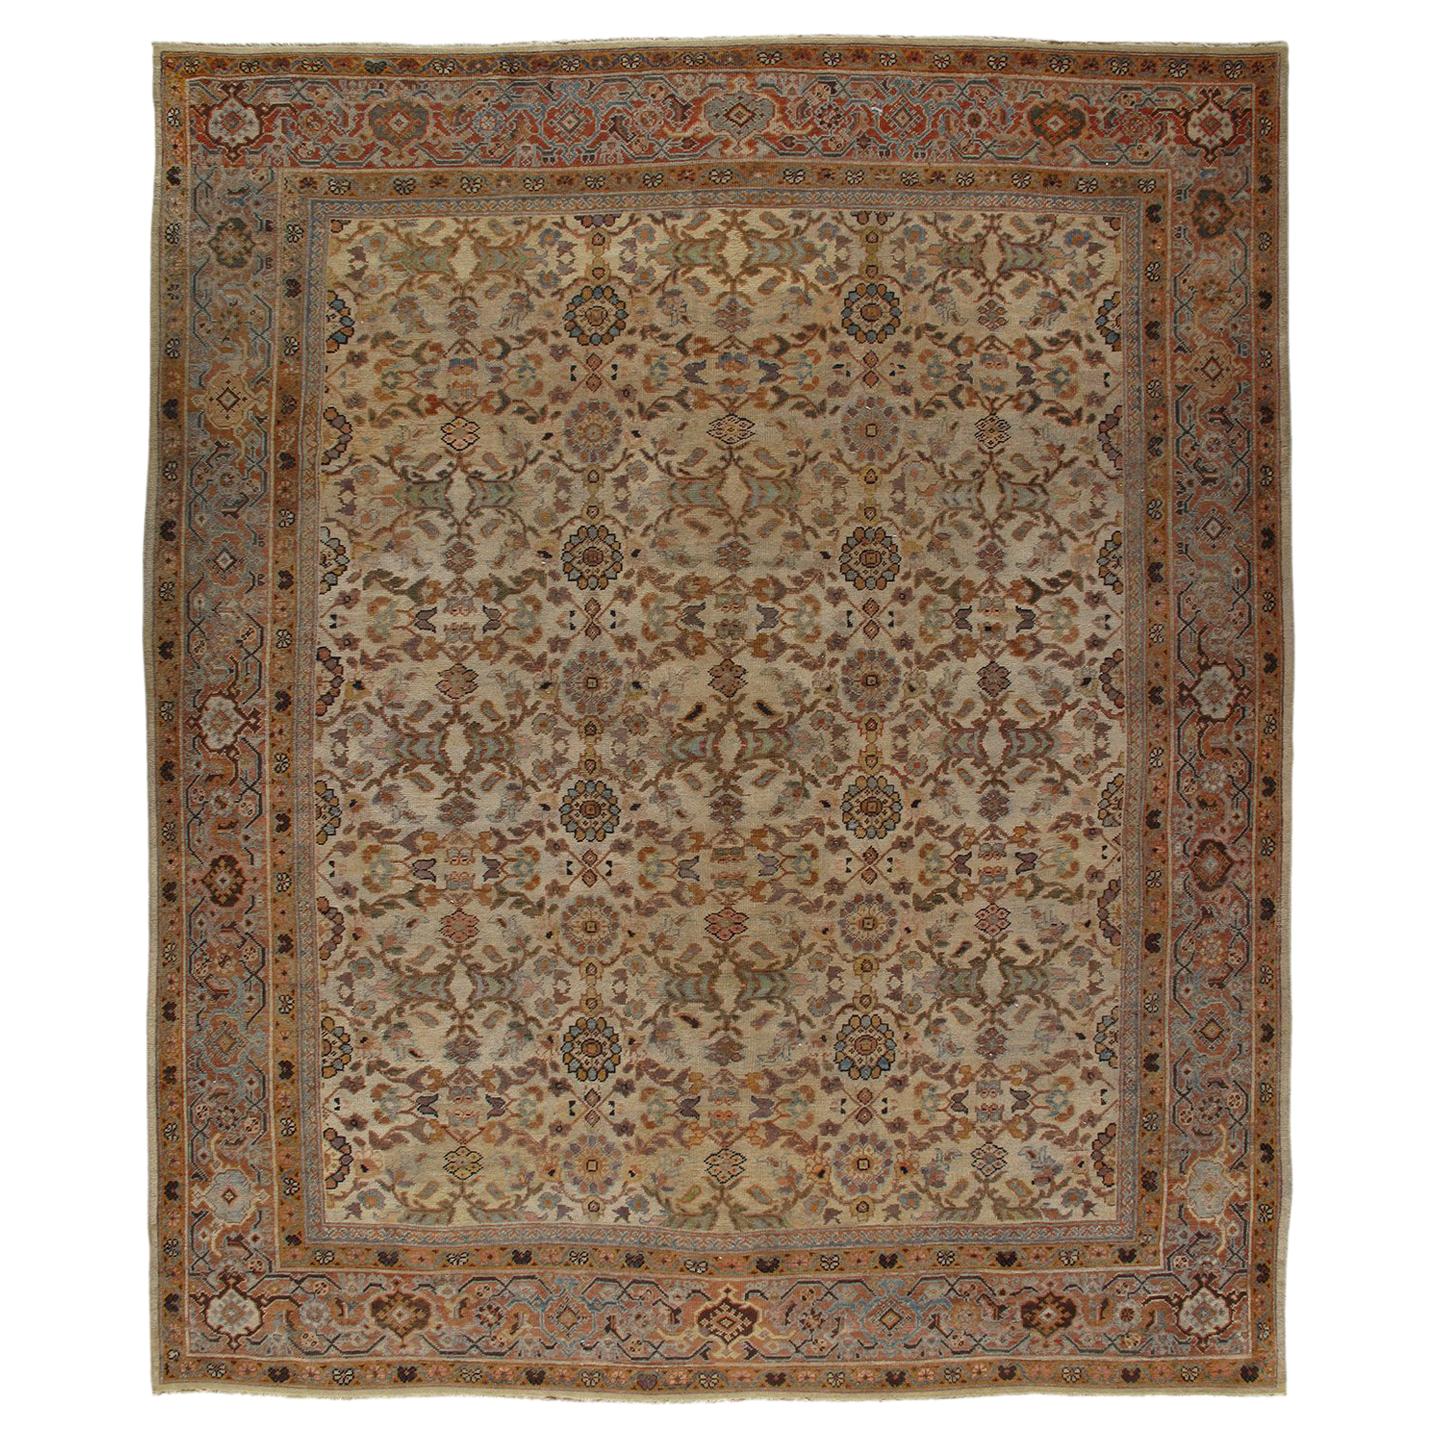 Antique Persian Mahal Hand-Knotted Rug with Beige and Rust Colors